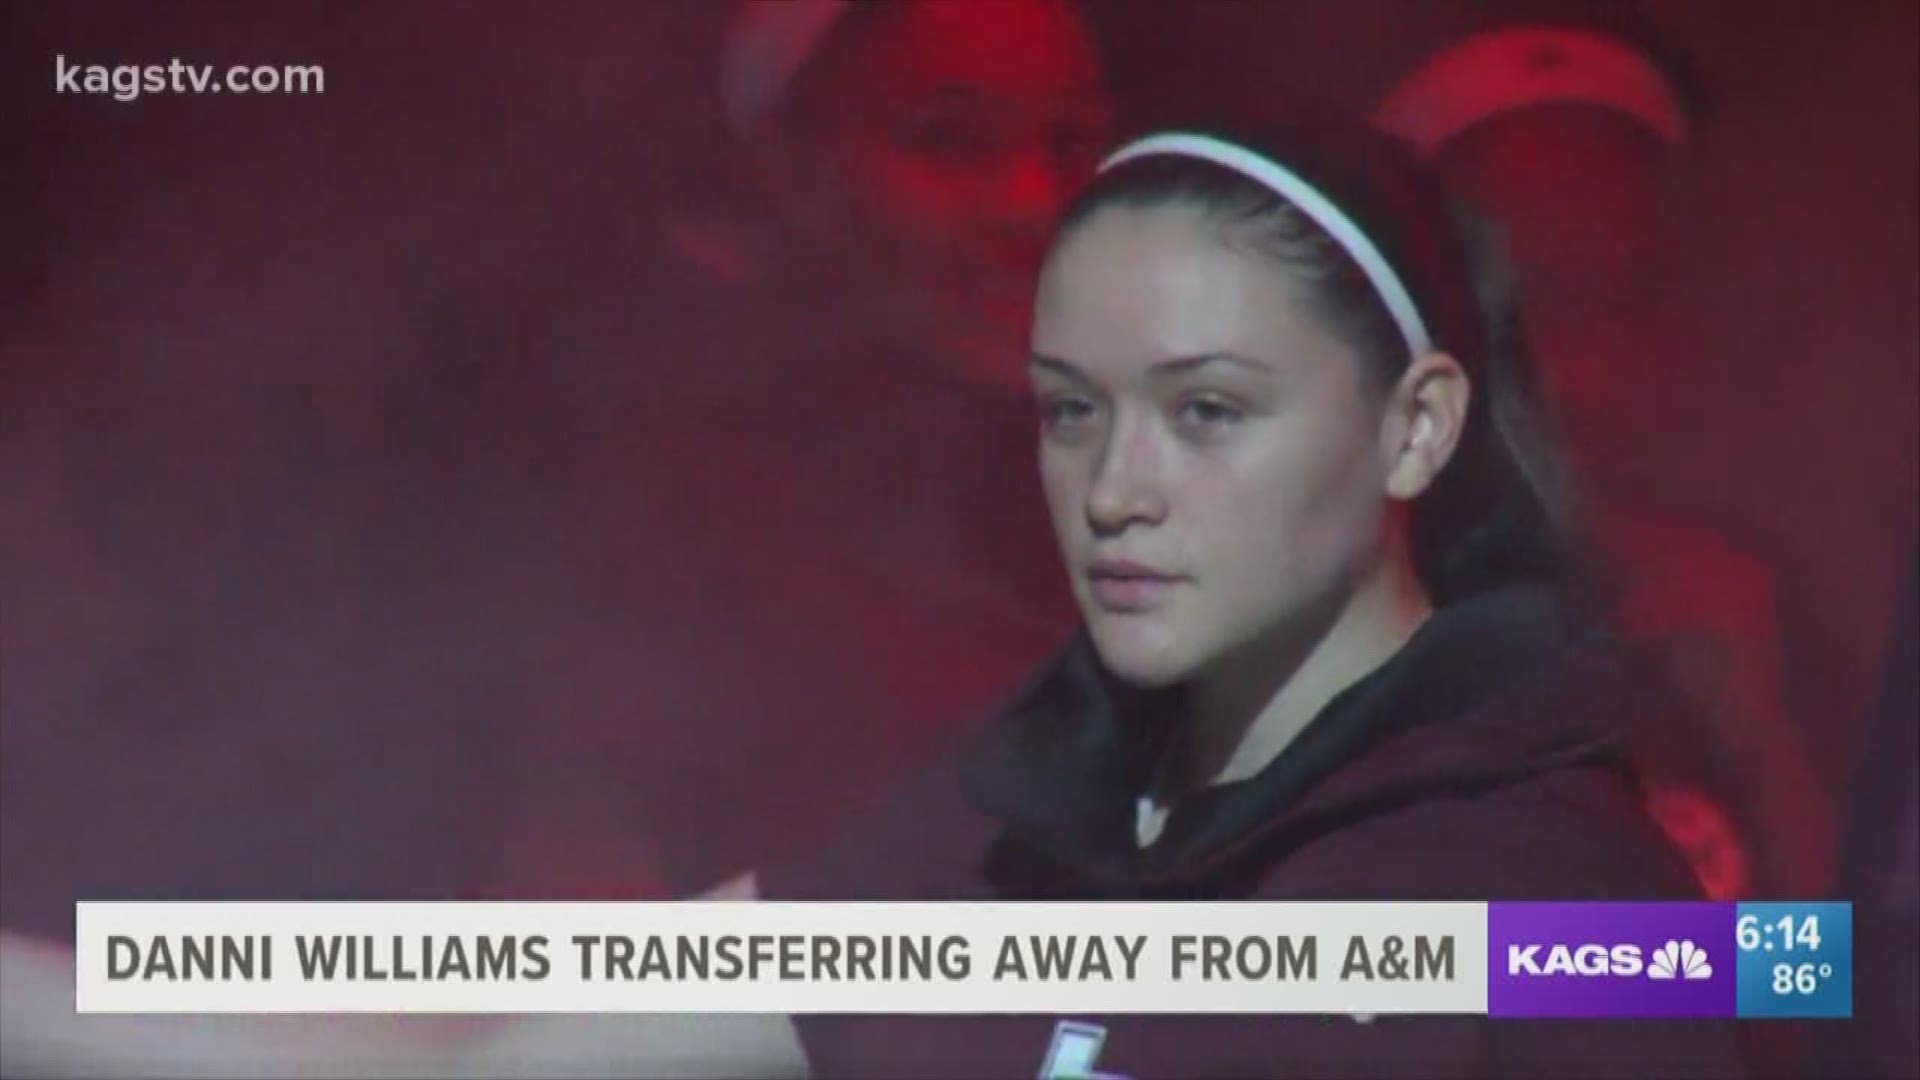 Texas A&M women's basketball player Danni Williams announced on Instagram on Wednesday that she plans to transfer away from Aggieland for her final year of eligibility.